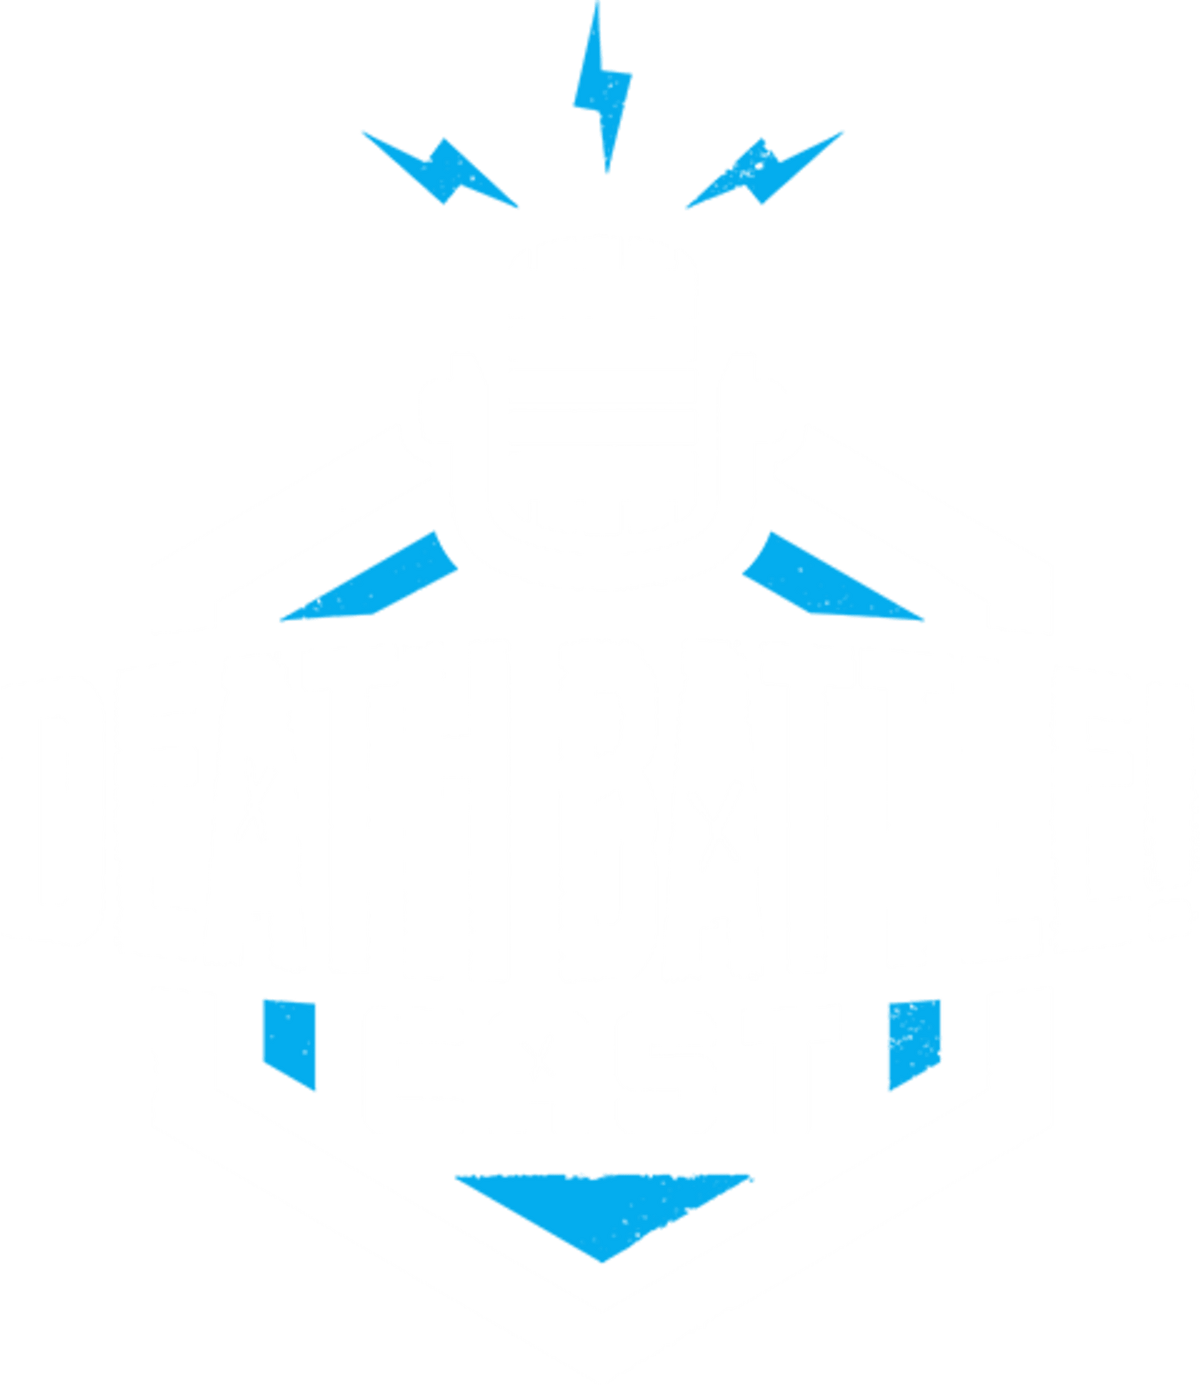 https://static.wikia.nocookie.net/deathbattle/images/d/dd/DB_Cast_Logo.png/revision/latest/scale-to-width-down/1200?cb=20191029113117